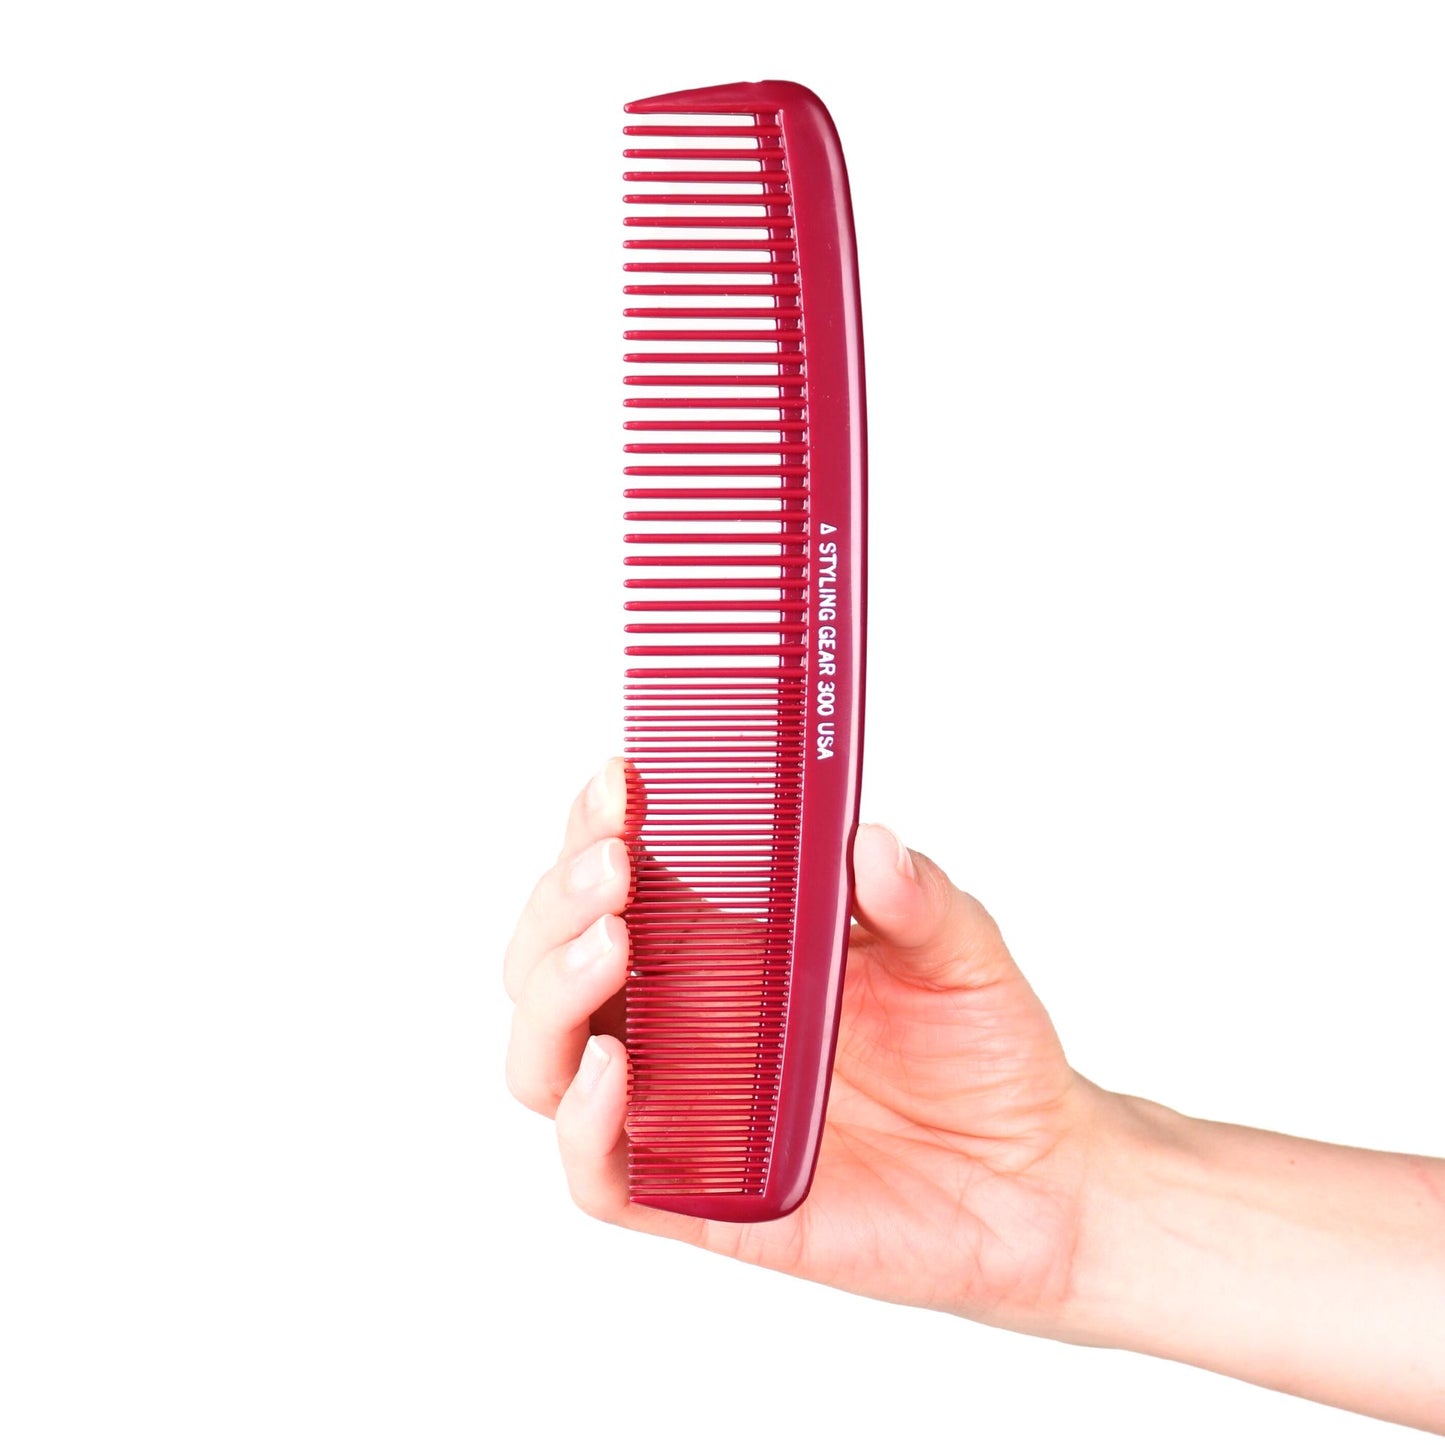 Styling Gear 300 Large Comb 8.5 In. Specialty Hair Styling Cutting Master Barber Stylist Combs Burgundy